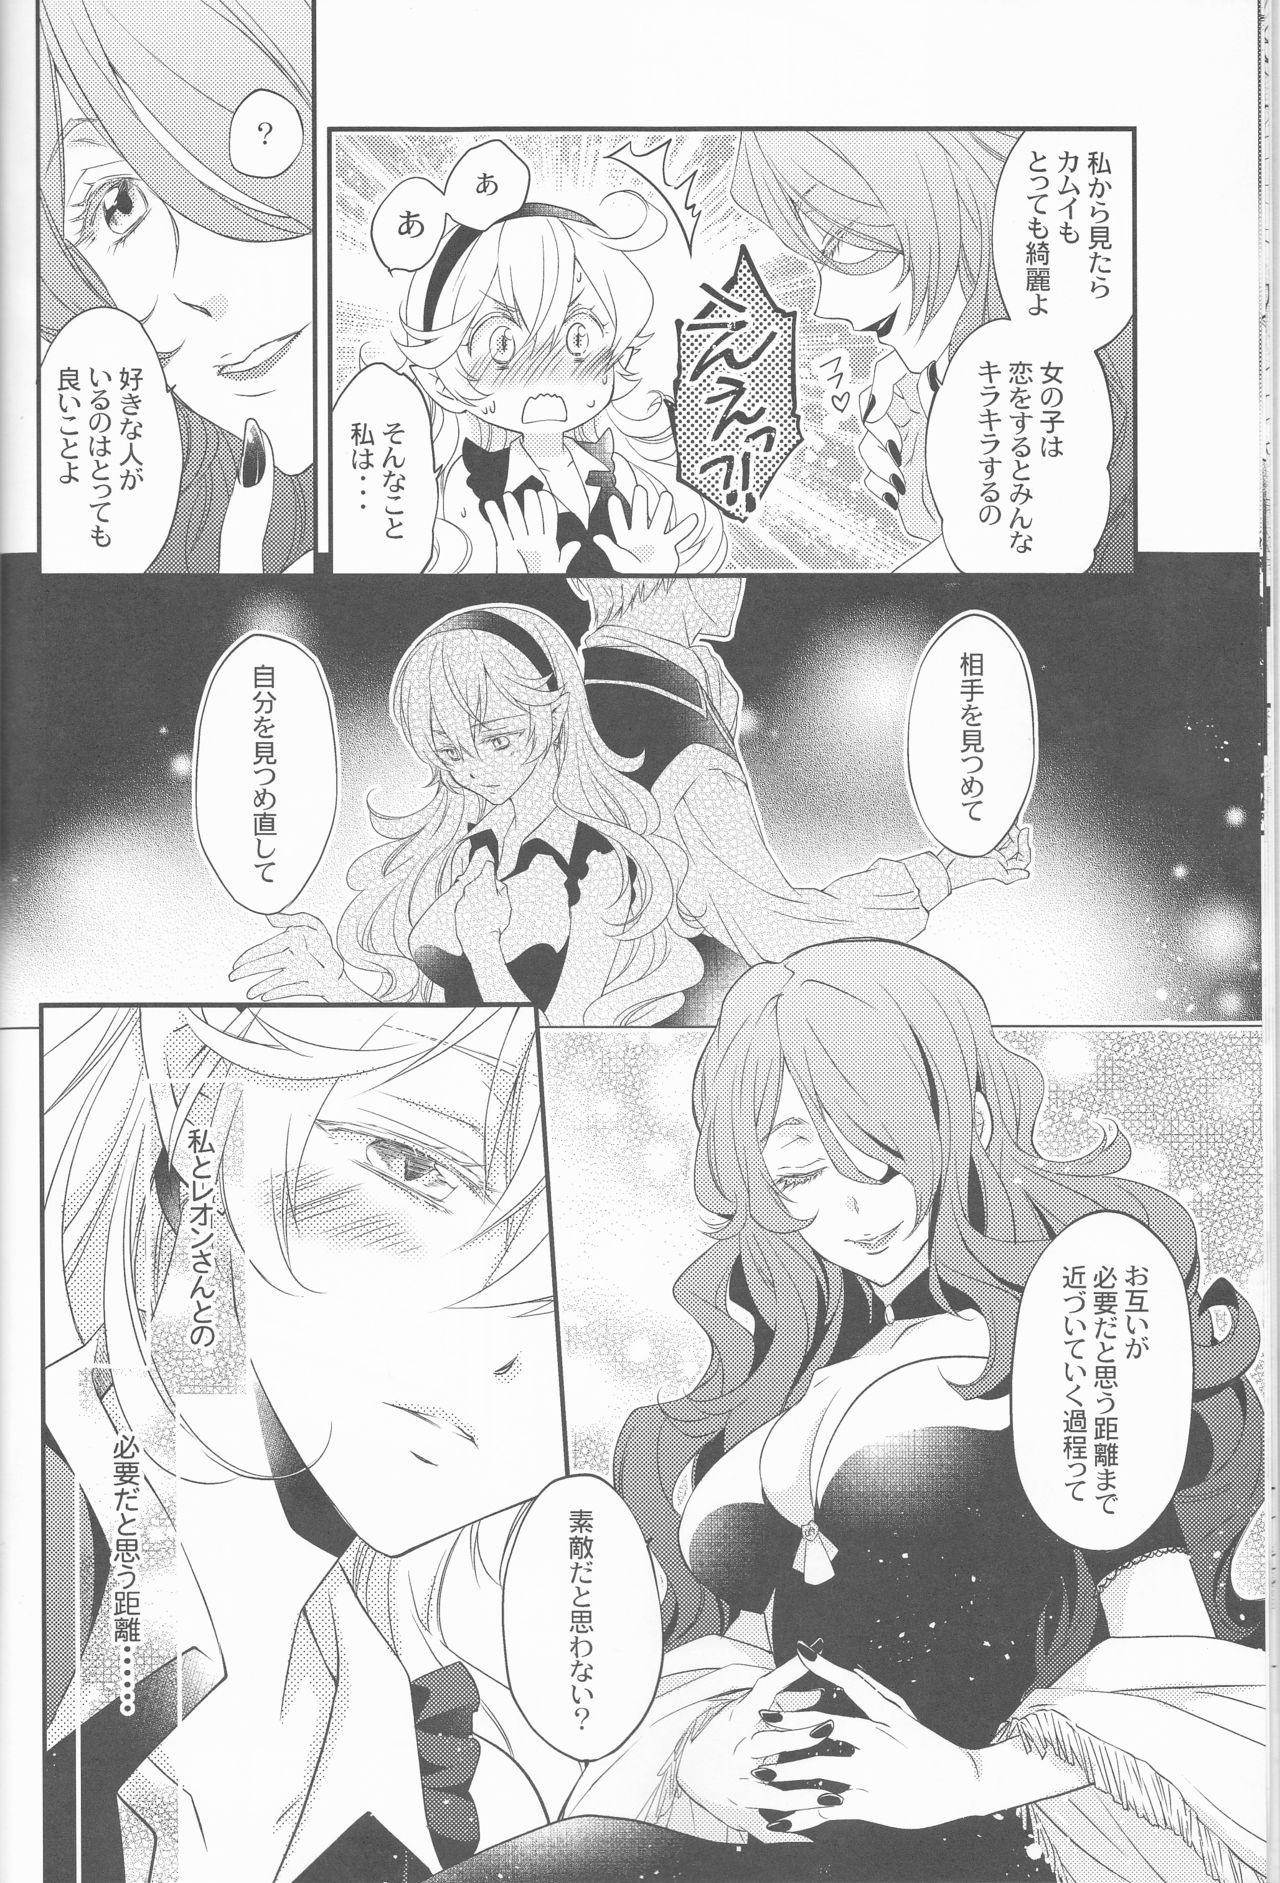 Groupfuck CROSSING LOVE - Fire emblem if Gaygroup - Page 12